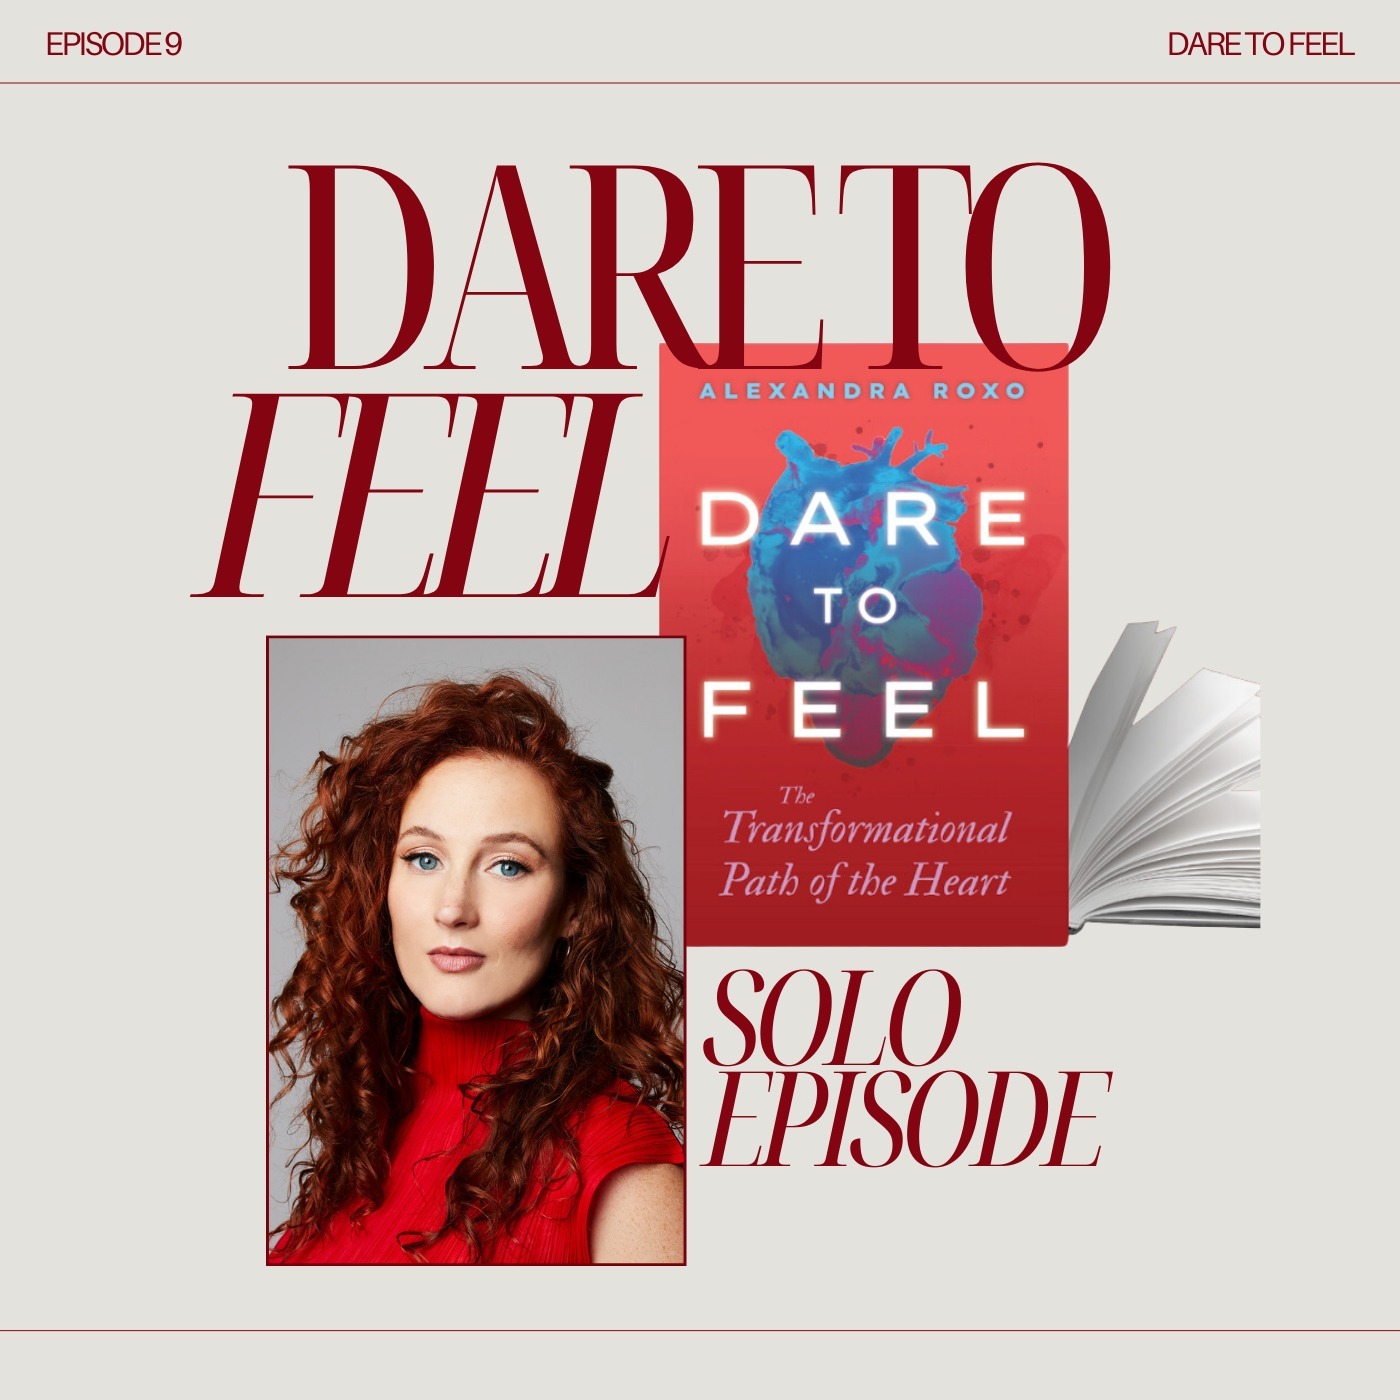 DARE TO FEEL